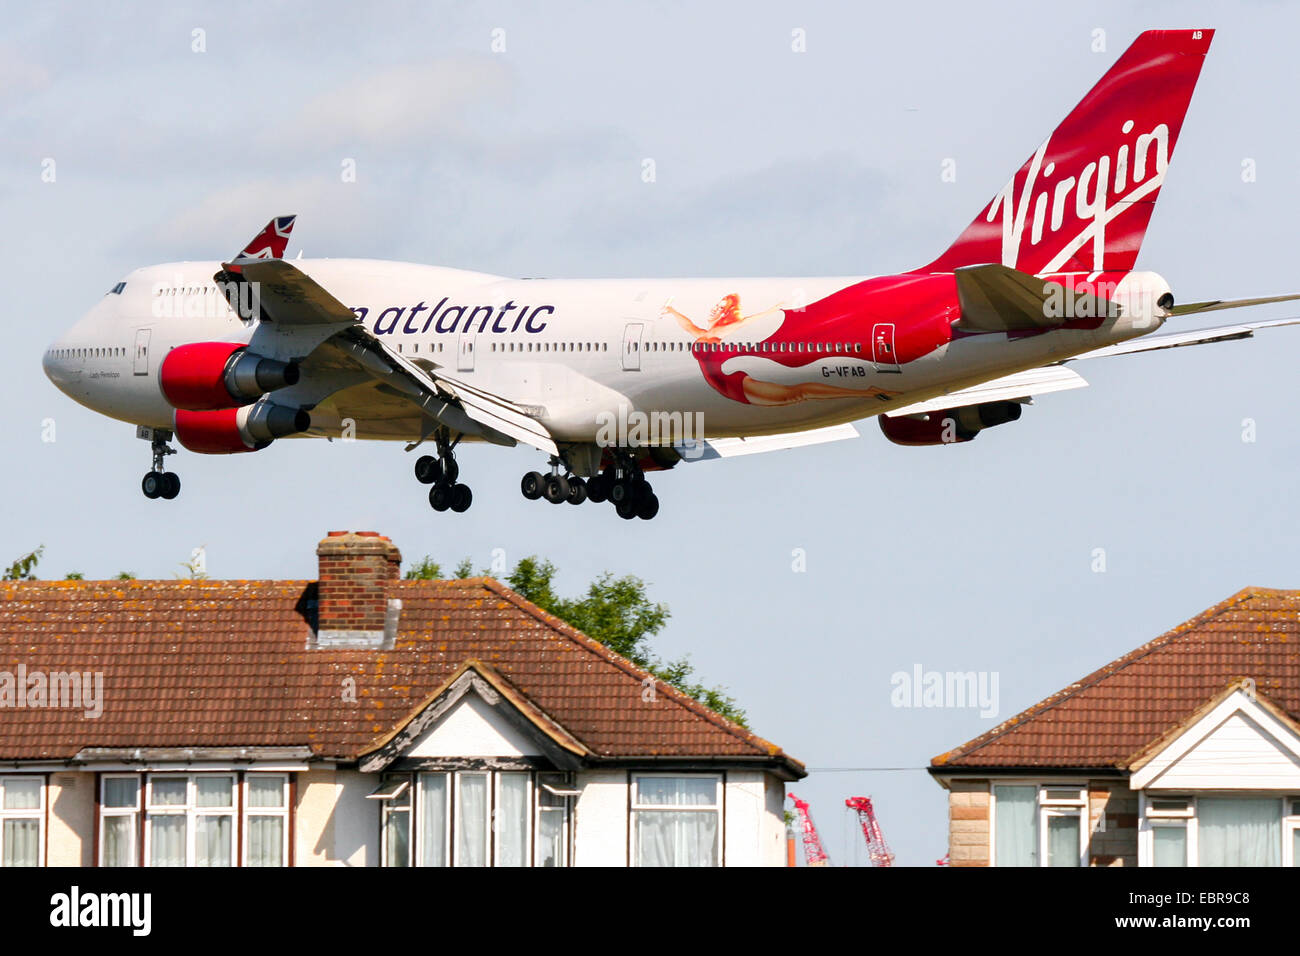 Virgin Atlantic Boeing 747-400 passes over nearby houses on approach to runway 27L at London Heathrow airport. Stock Photo